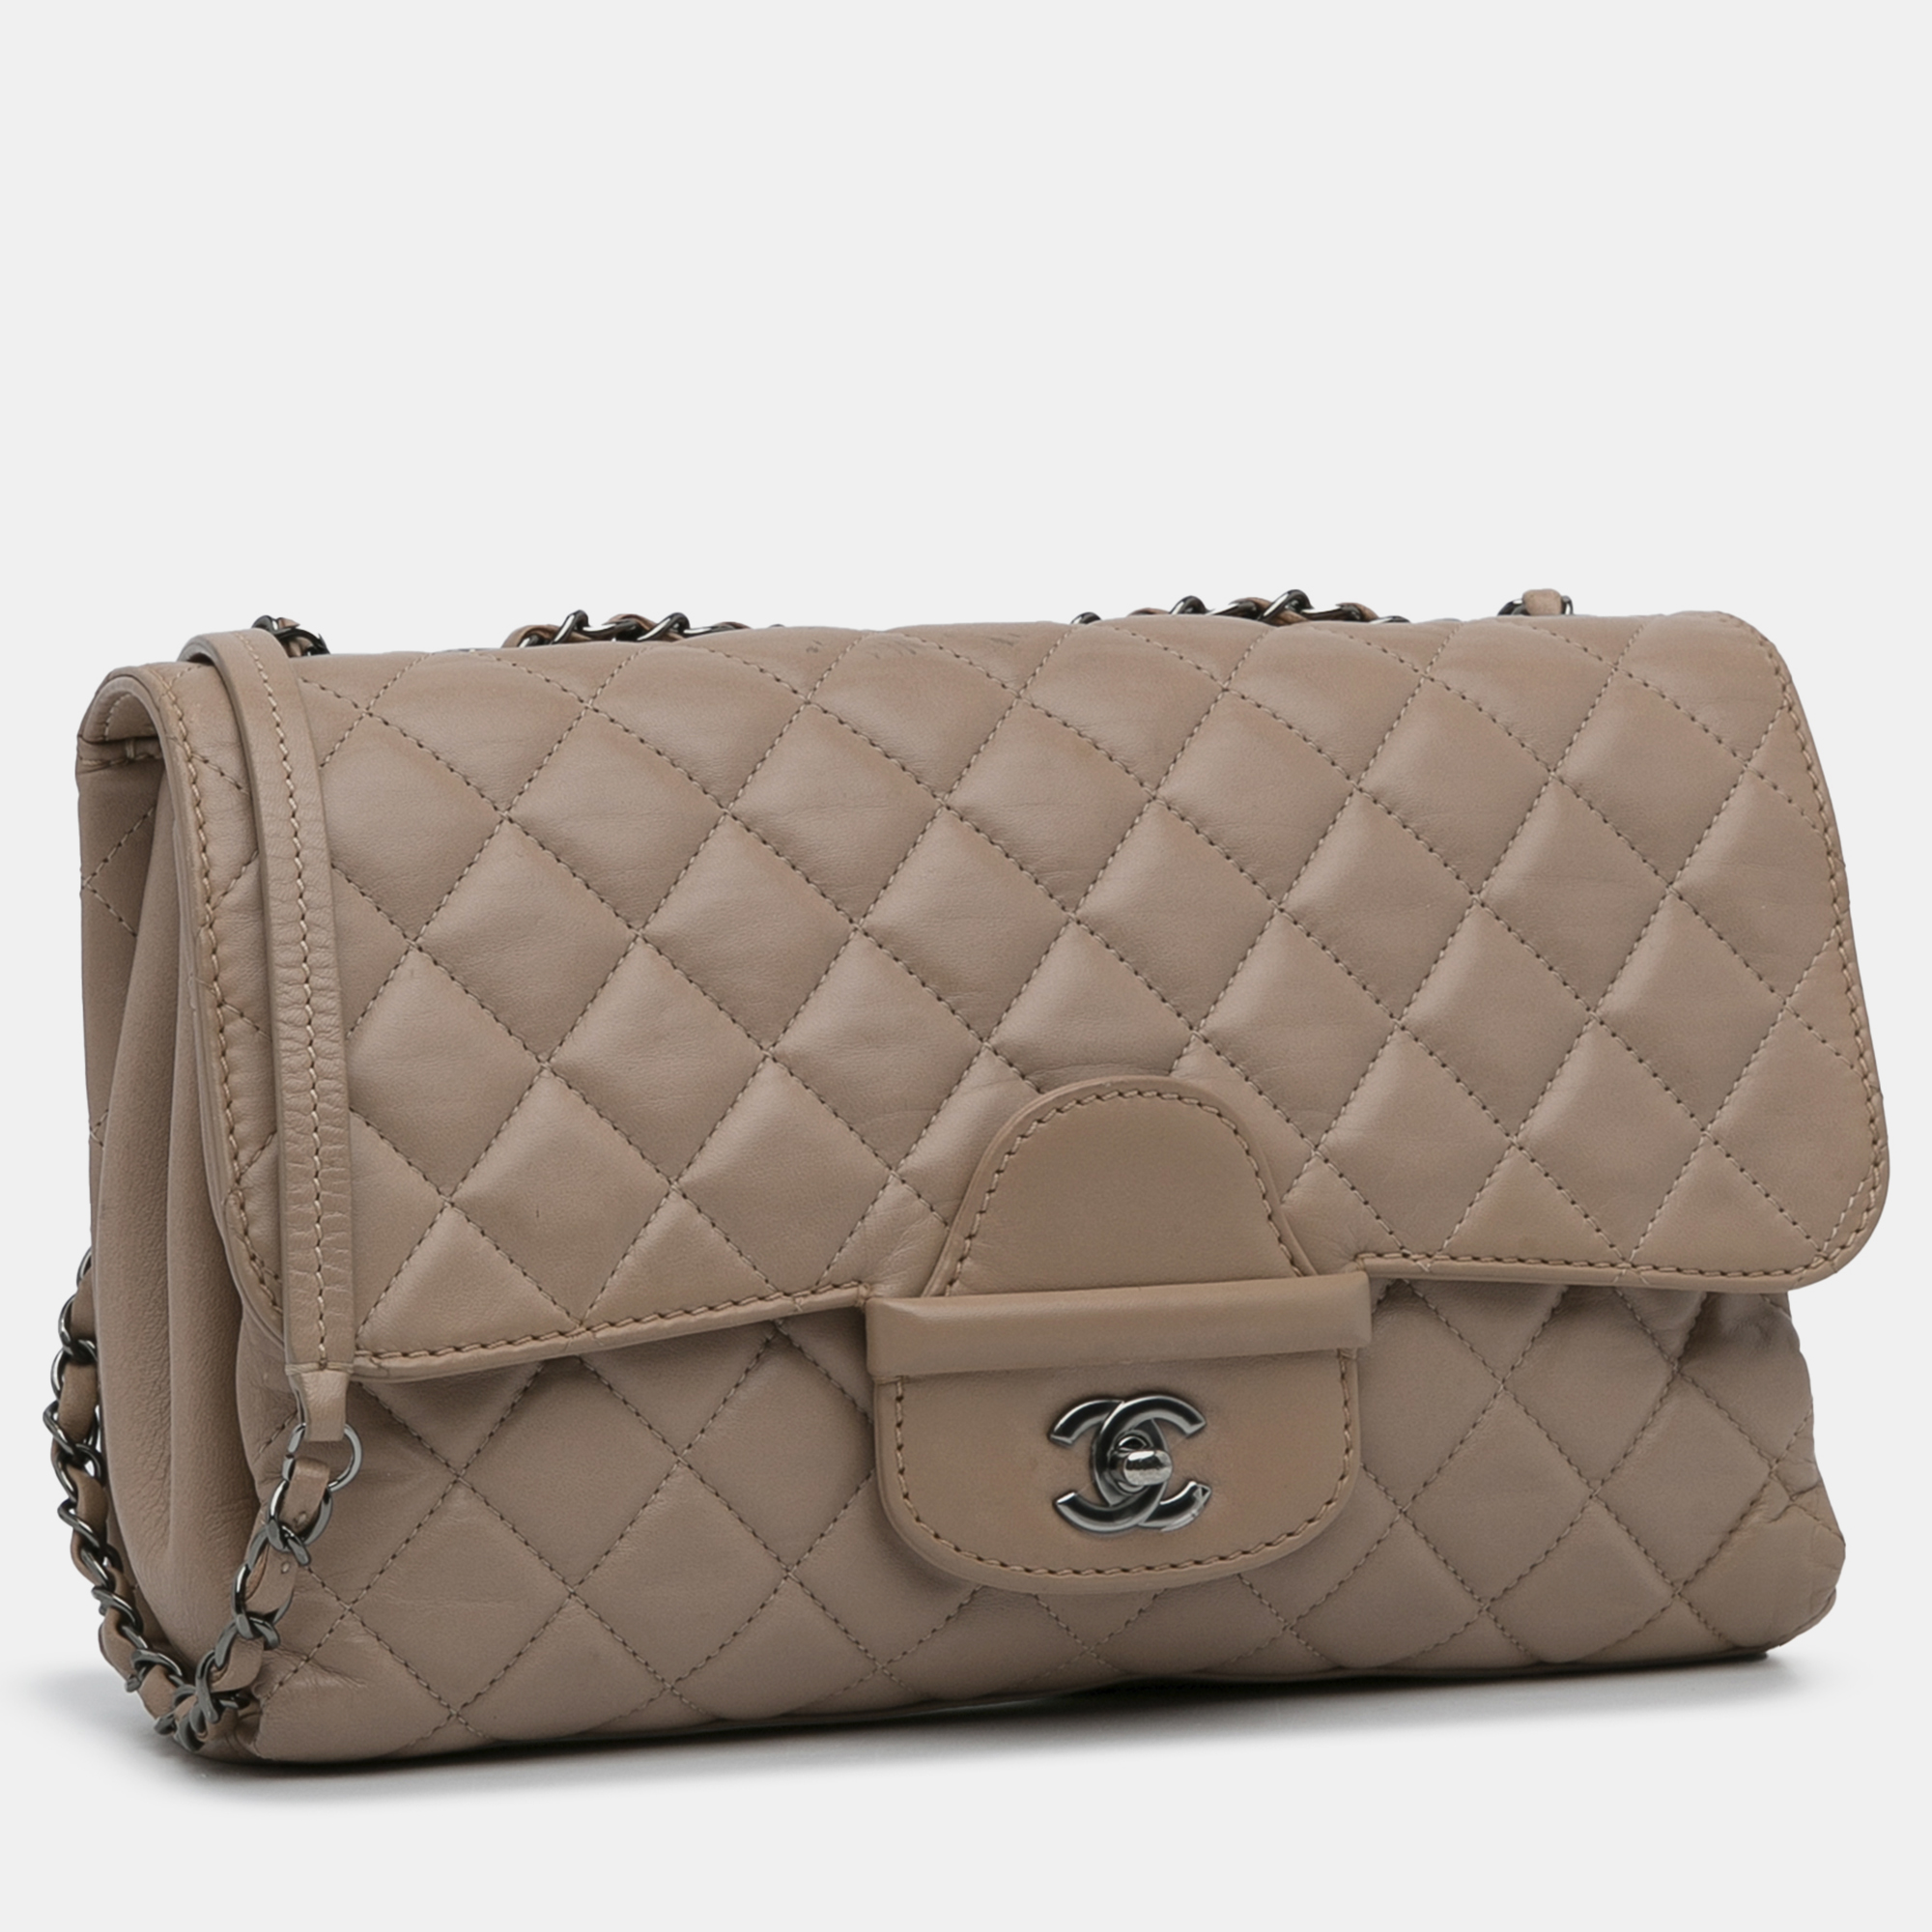 Chanel Beige CC Turnlock Quilted Flap Bag